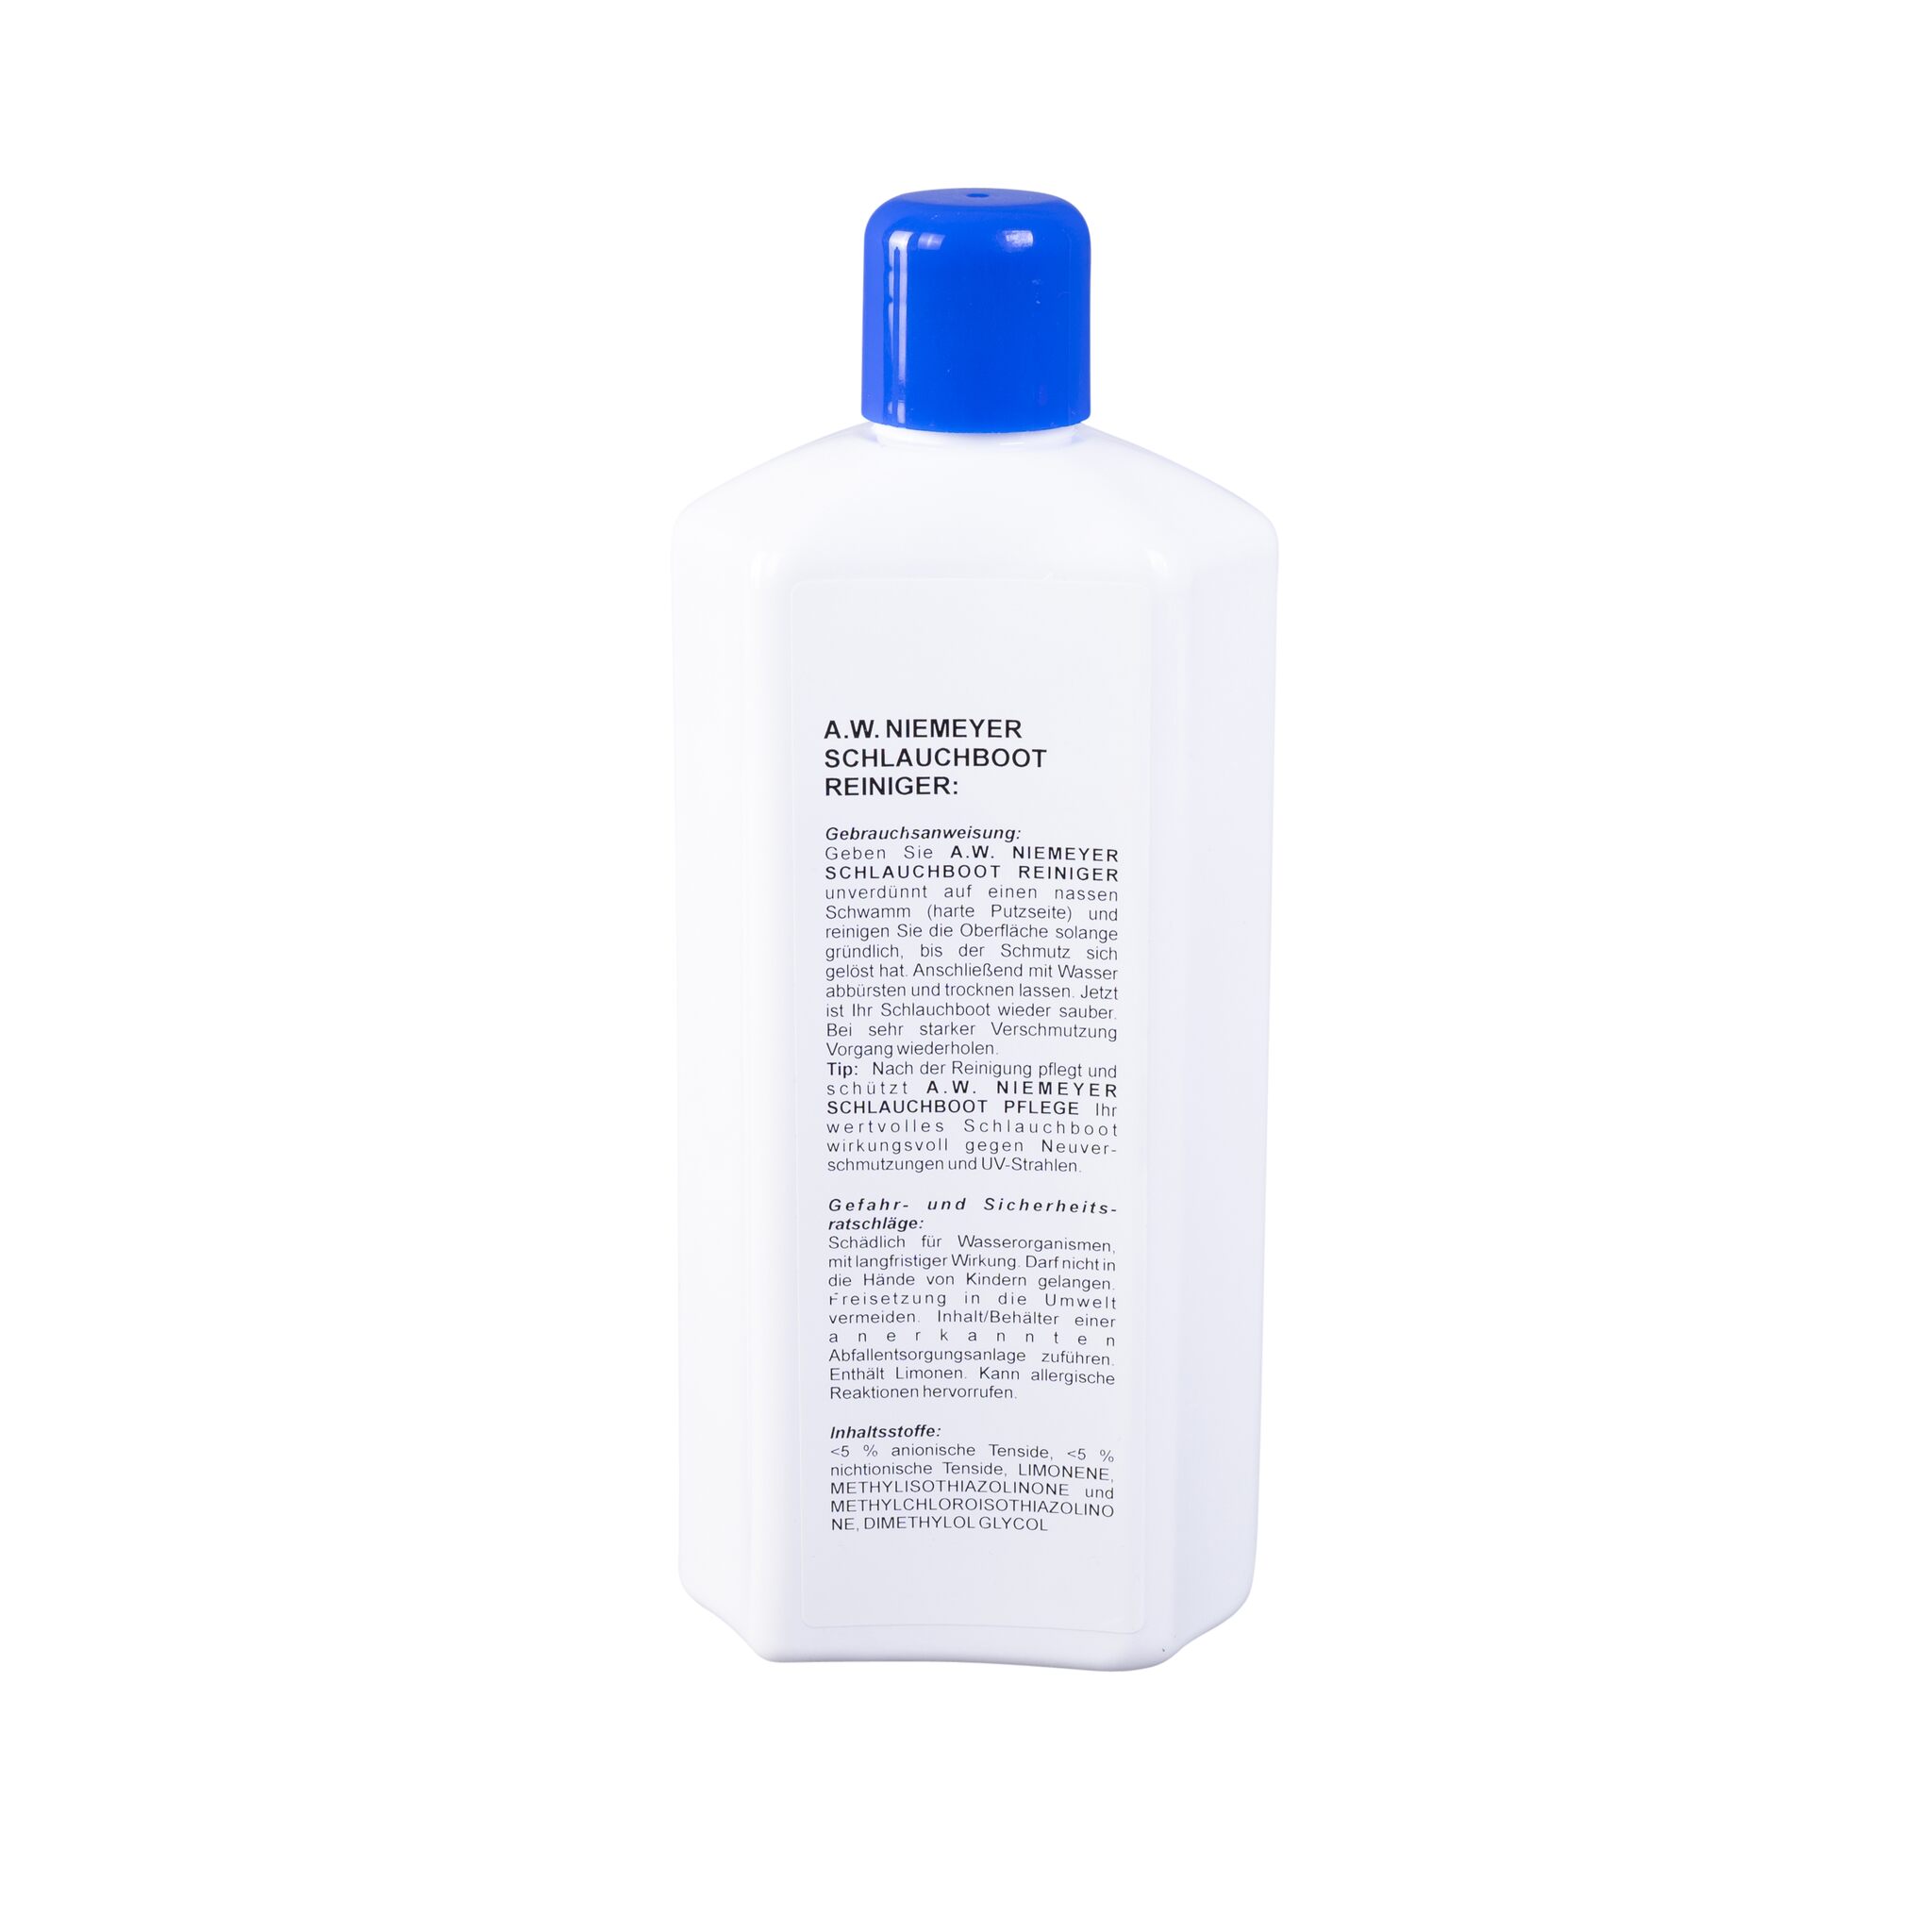 awn inflatable boat cleaner